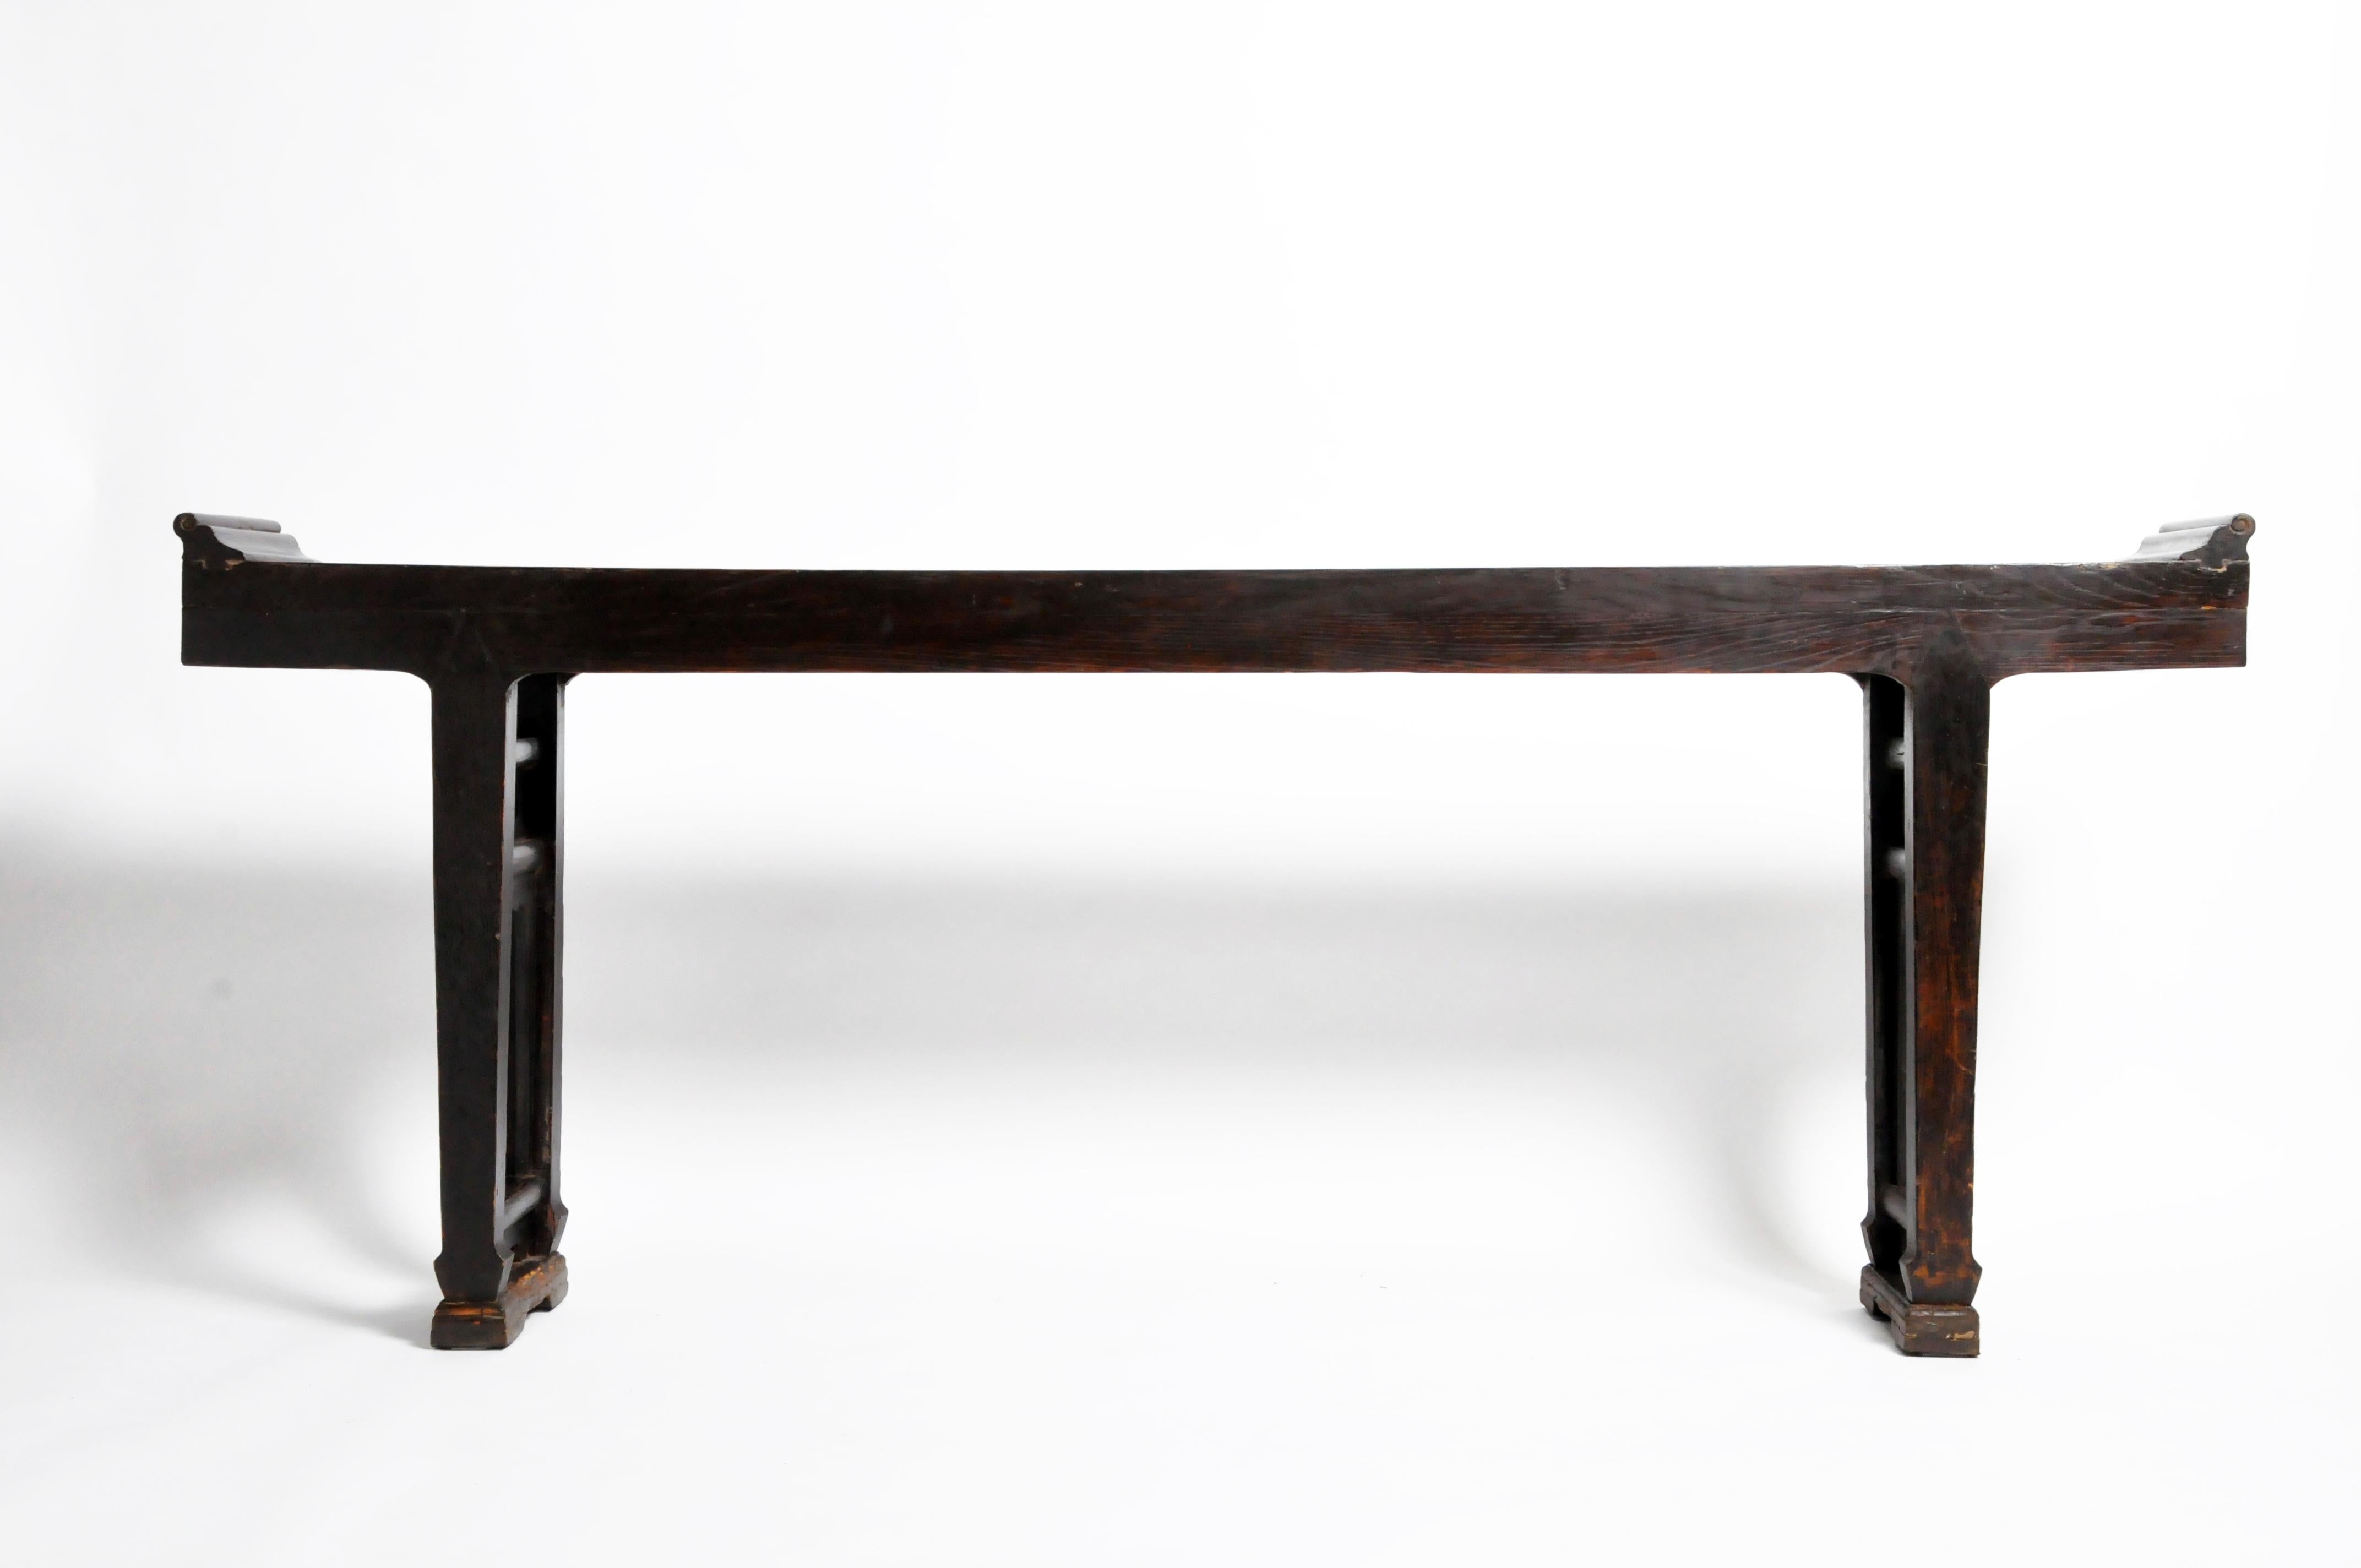 This handsome altar table is from Shanxi, China and was made from elmwood, circa 17th century. The piece features double stretchers for support, a beautifully aged patina, and dates to the Qing Dynasty. Wear consistent with age and use. Great as a